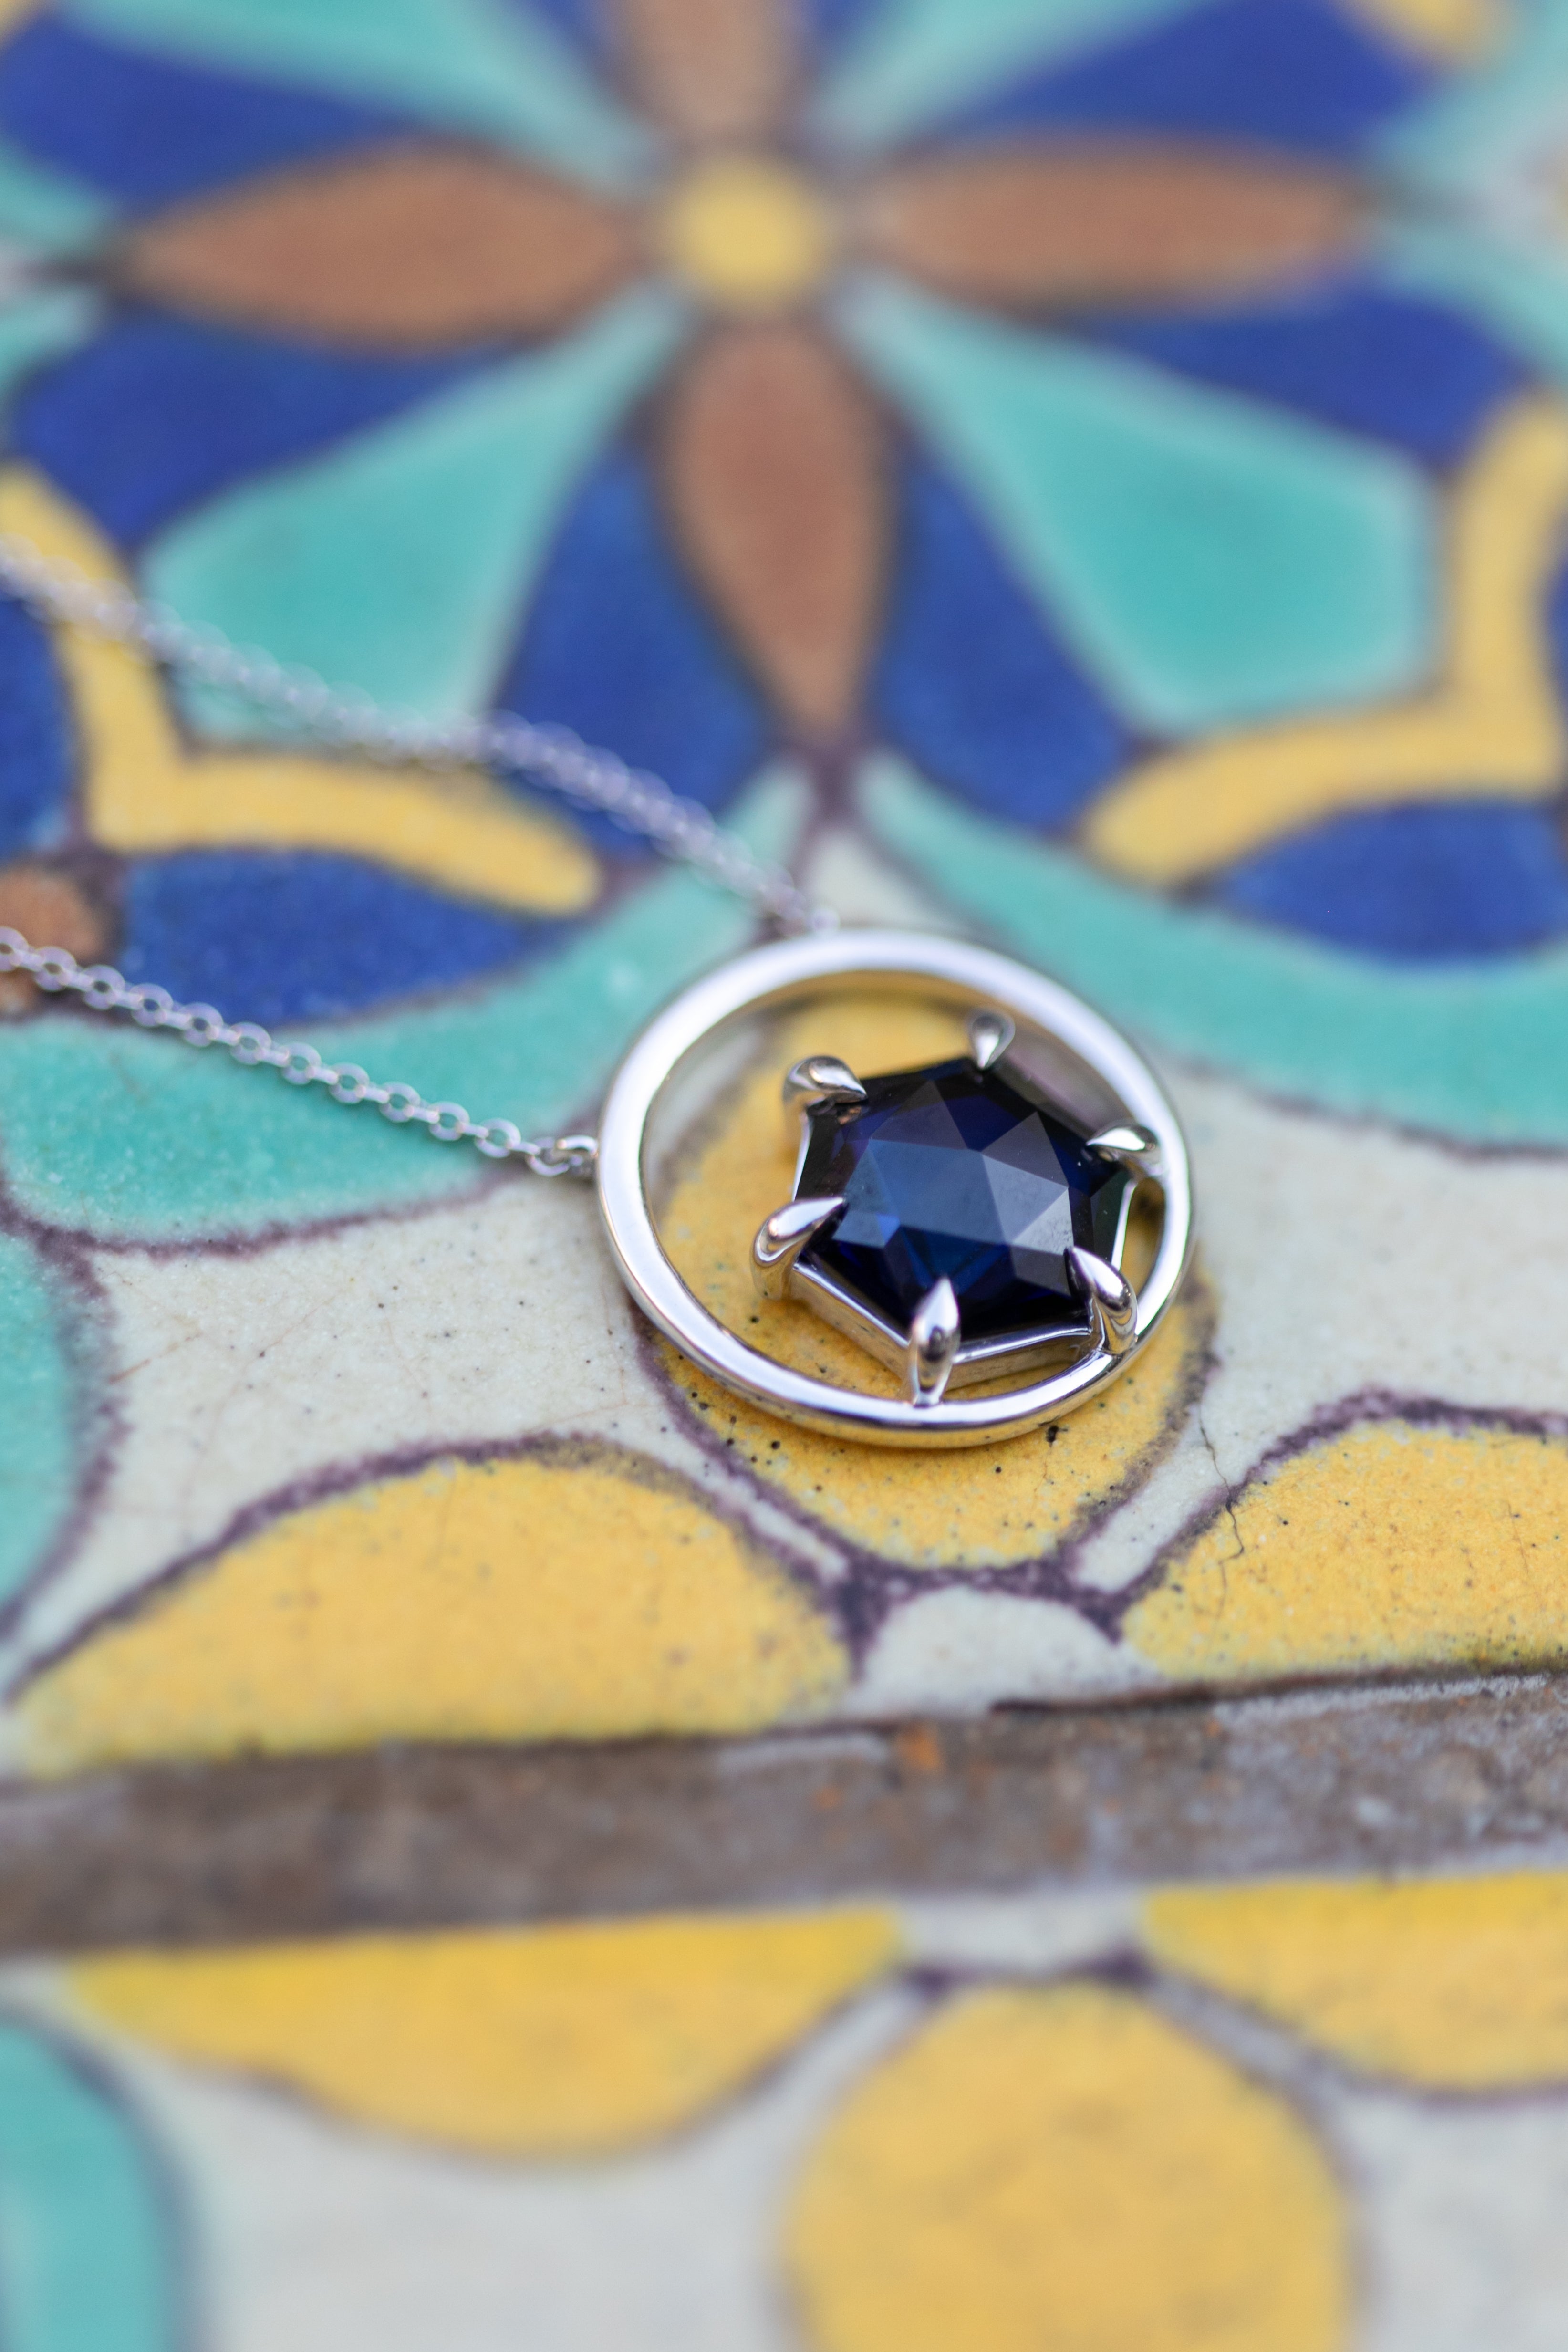 A close up shot of the gemstone necklace in silver and tanzanite laying on a colorful Spanish tile.